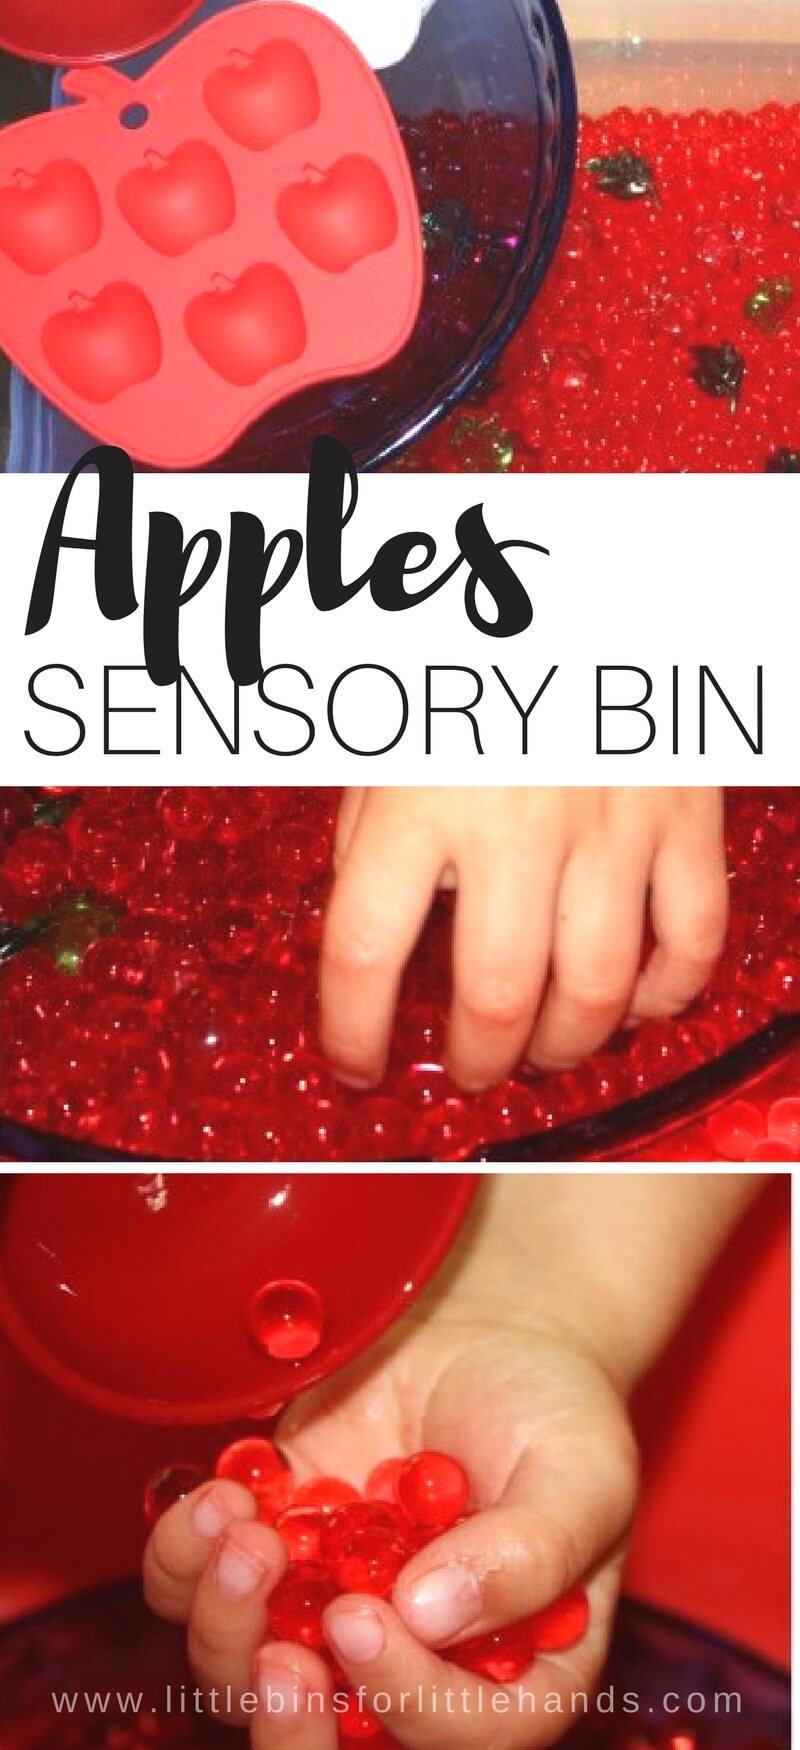 Creating simple sensory play experiences for our young explorers is an awesome way to have them engage their senses, explore new things, and learn all sorts of great life skills. We created this water beads apples sensory bin to explore the cool textures of this neat sensory bin filler and also to enjoy apple themed sensory play for fall!